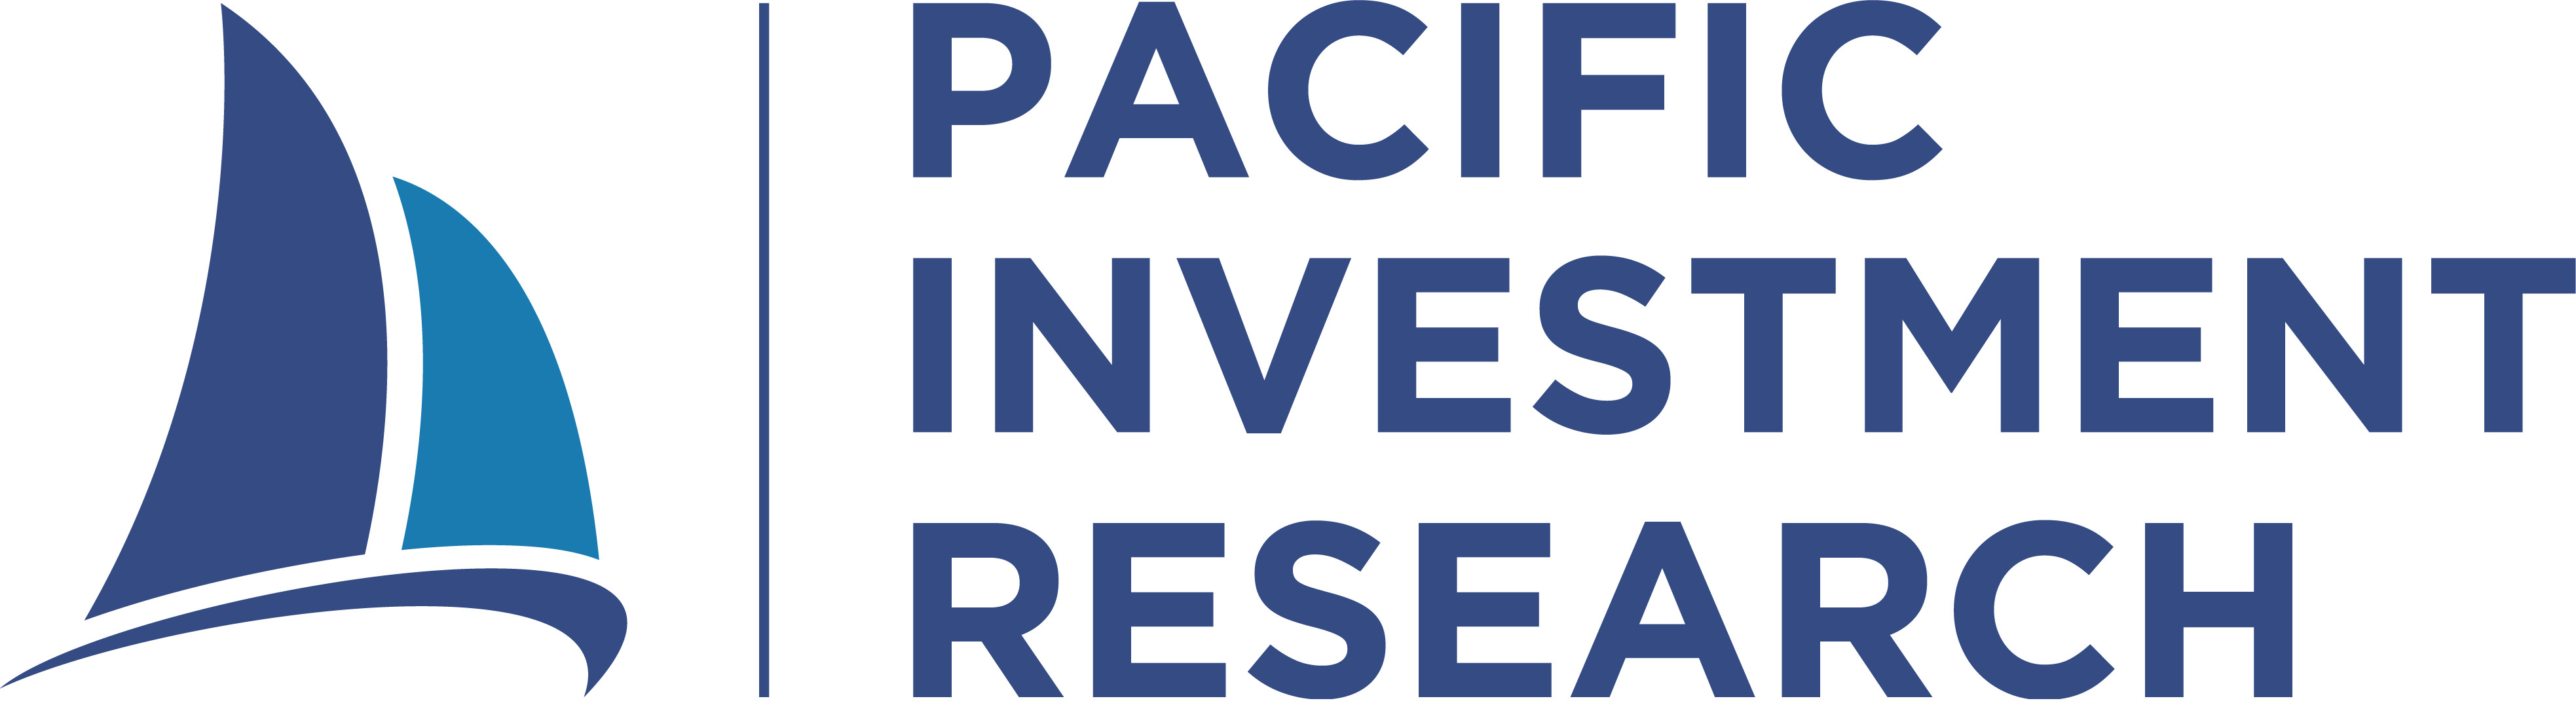 Pacific Investment Research